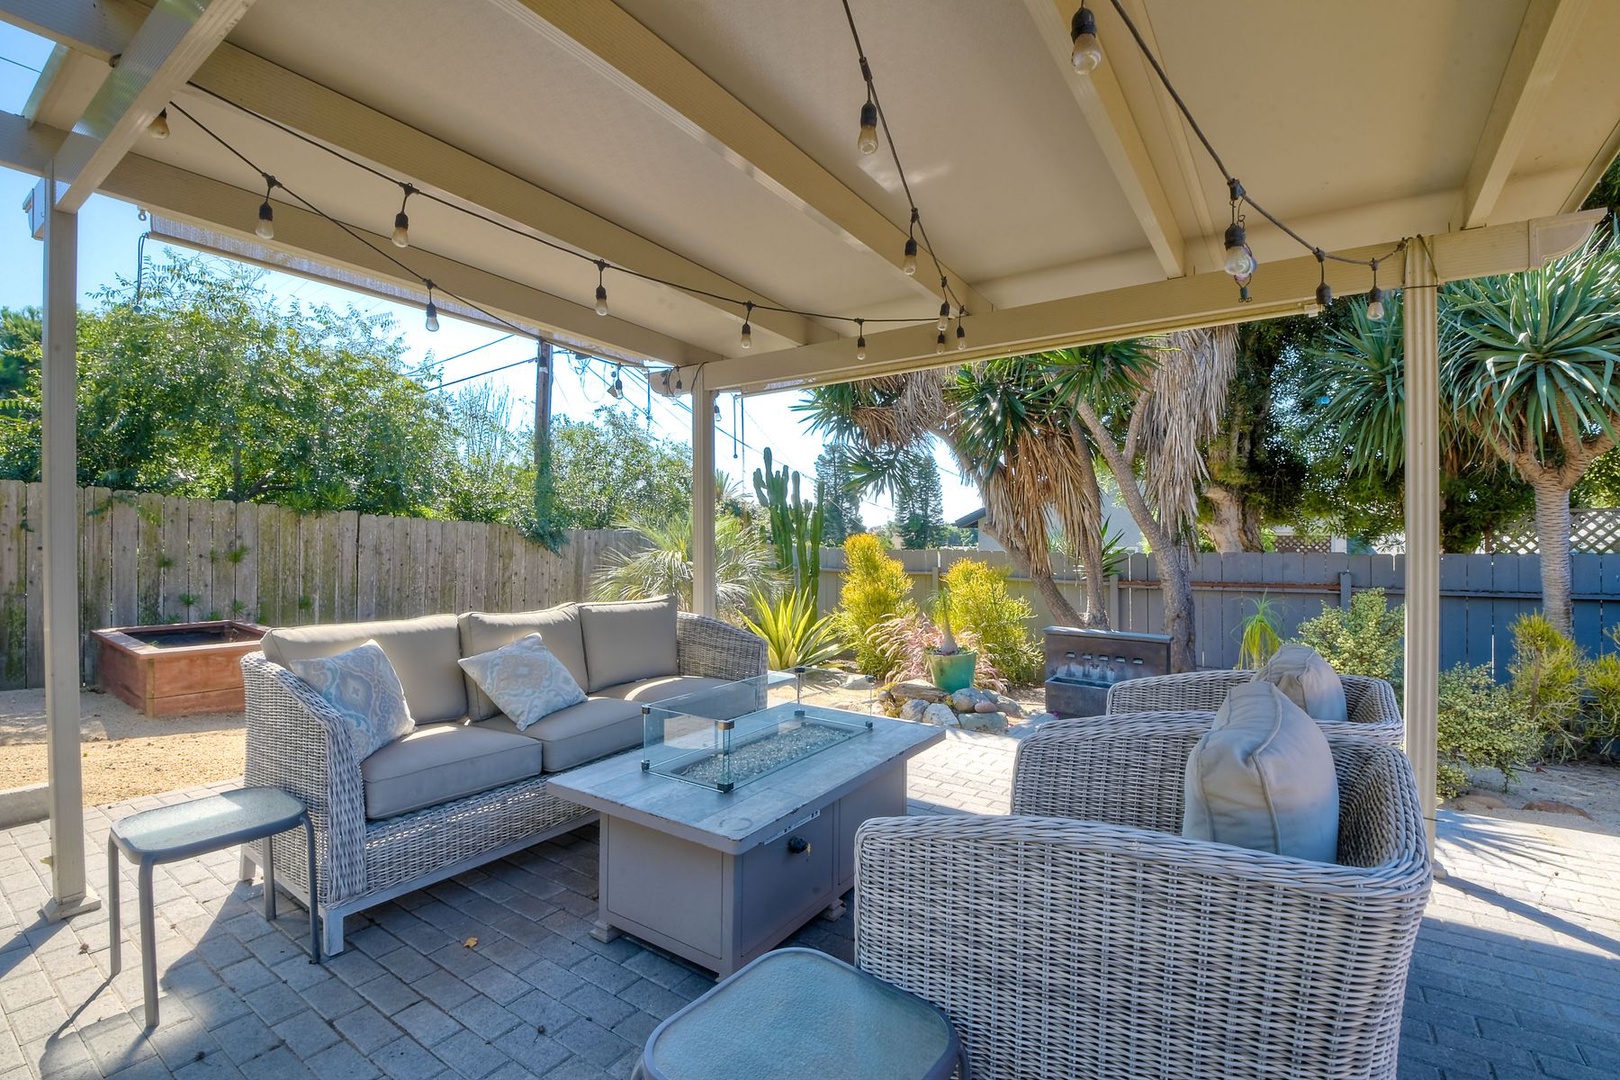 Head outside to the back yard & relax in the shade under the pergola